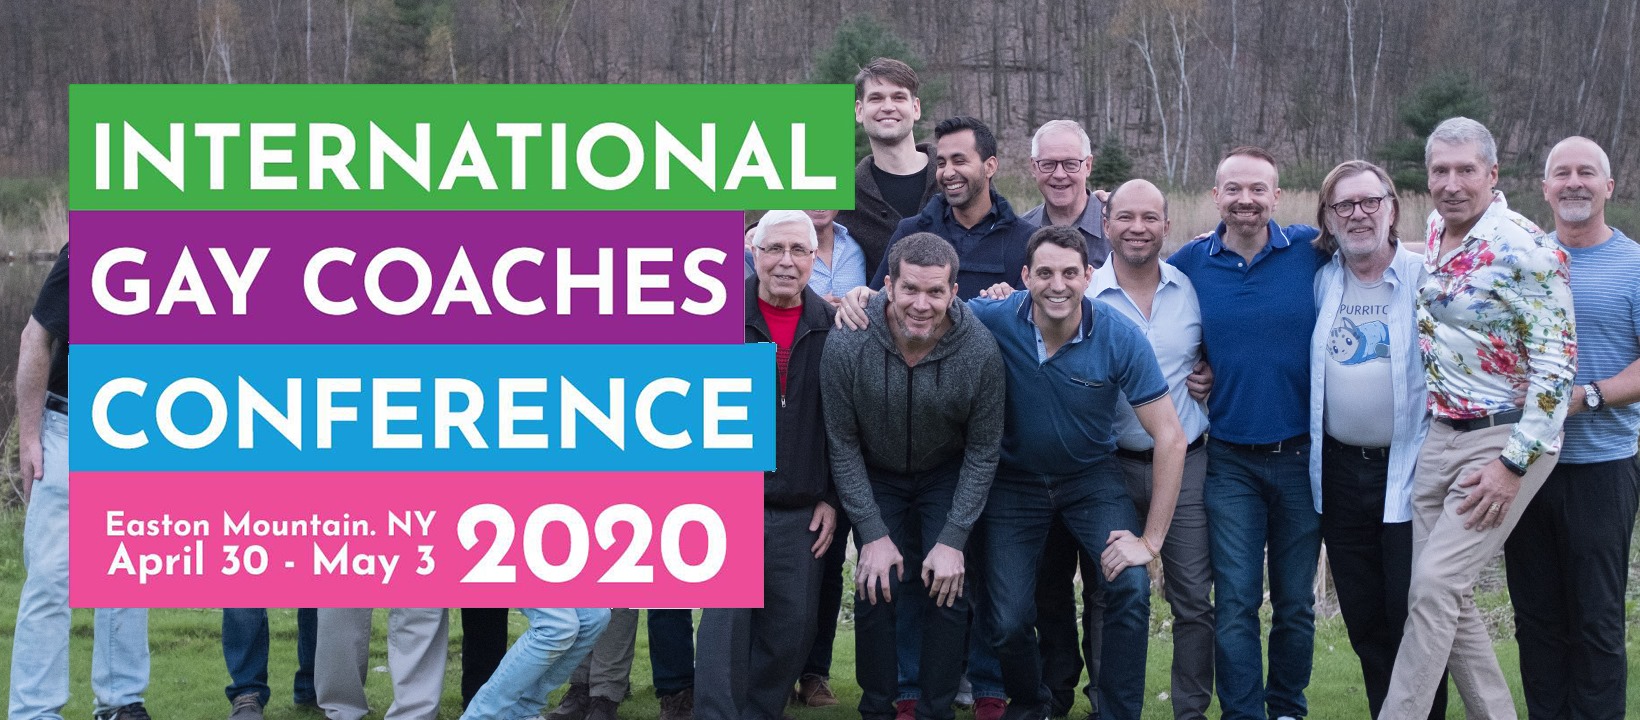 Gay Coaches Conference Banner Image